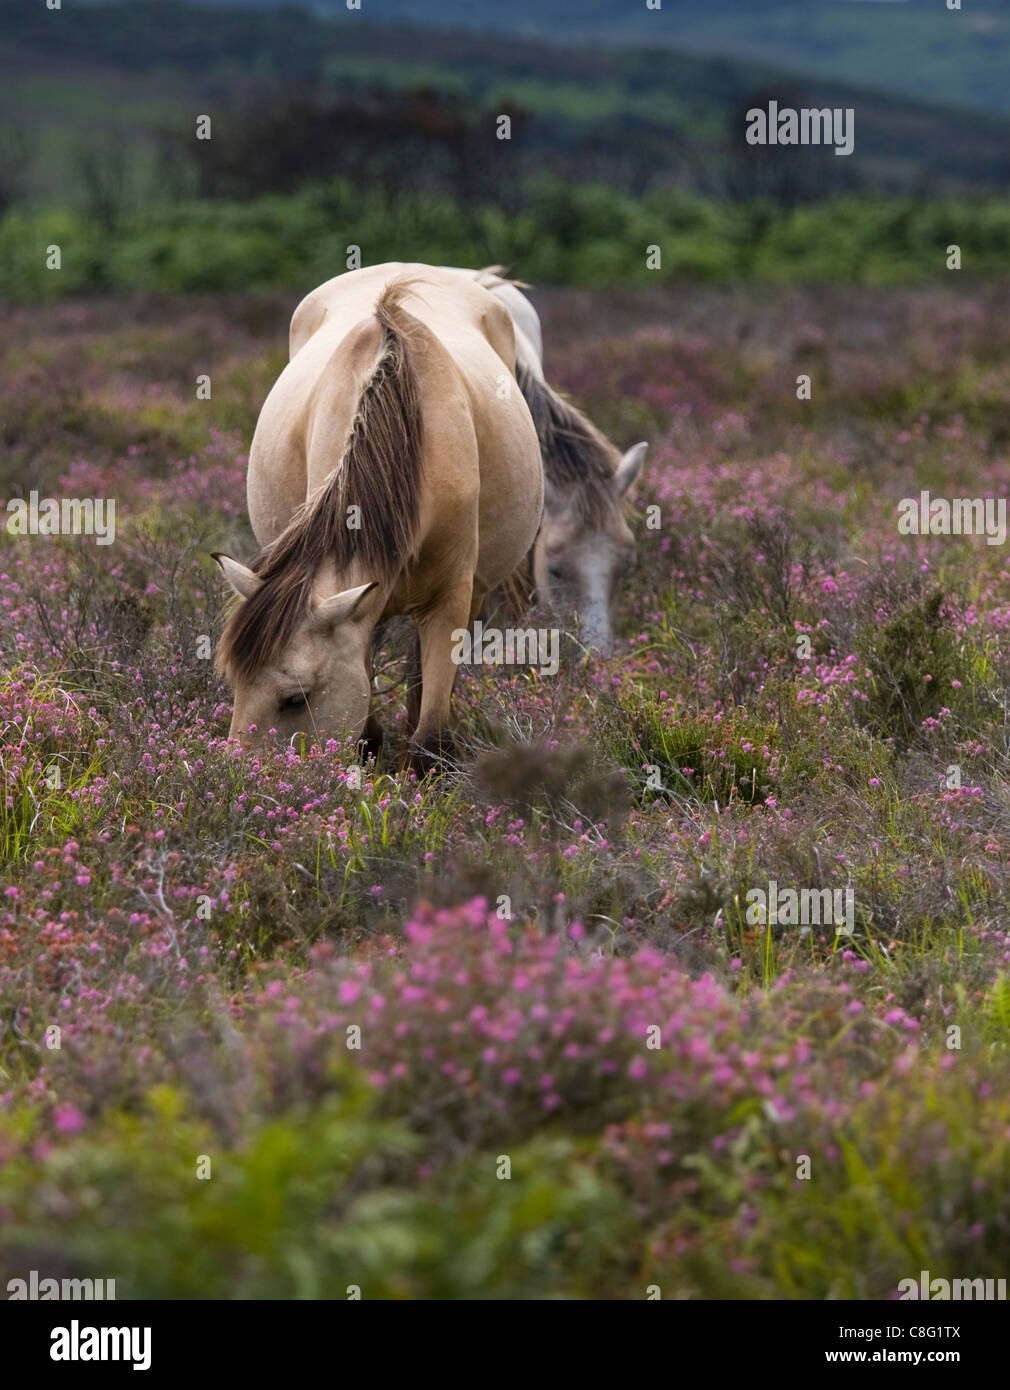 Two New Forest ponies walking through the flowering heather on a sunny, windy day. A horizontal tree line forms the background. Stock Photo